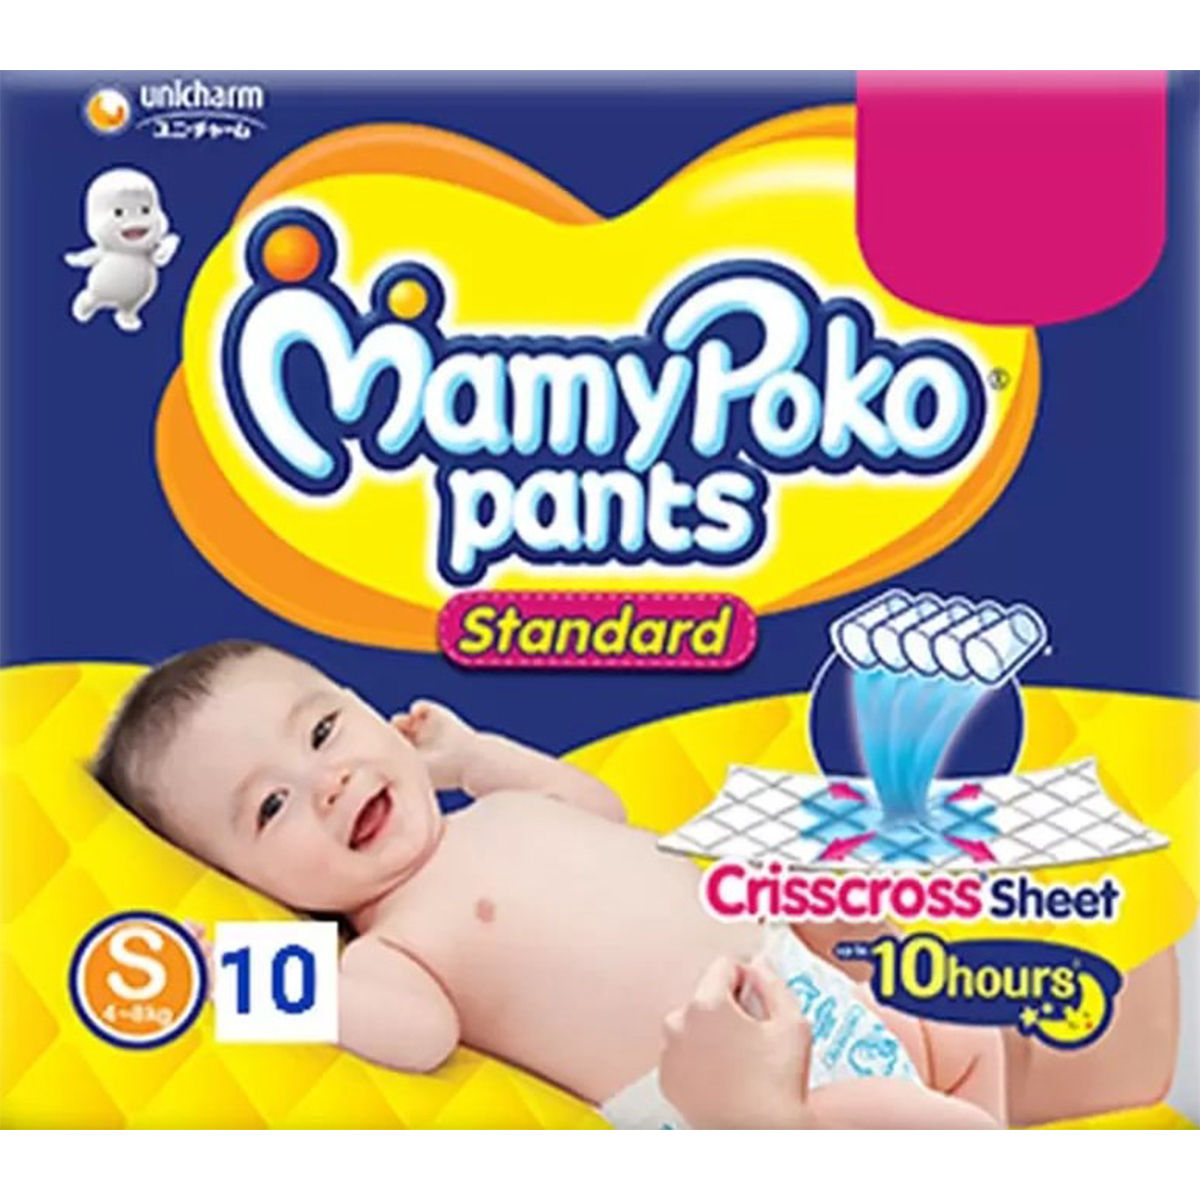 MamyPoko Standard Diaper Pants Small, 10 Count Price, Uses, Side Effects, Composition - Apollo Pharmacy